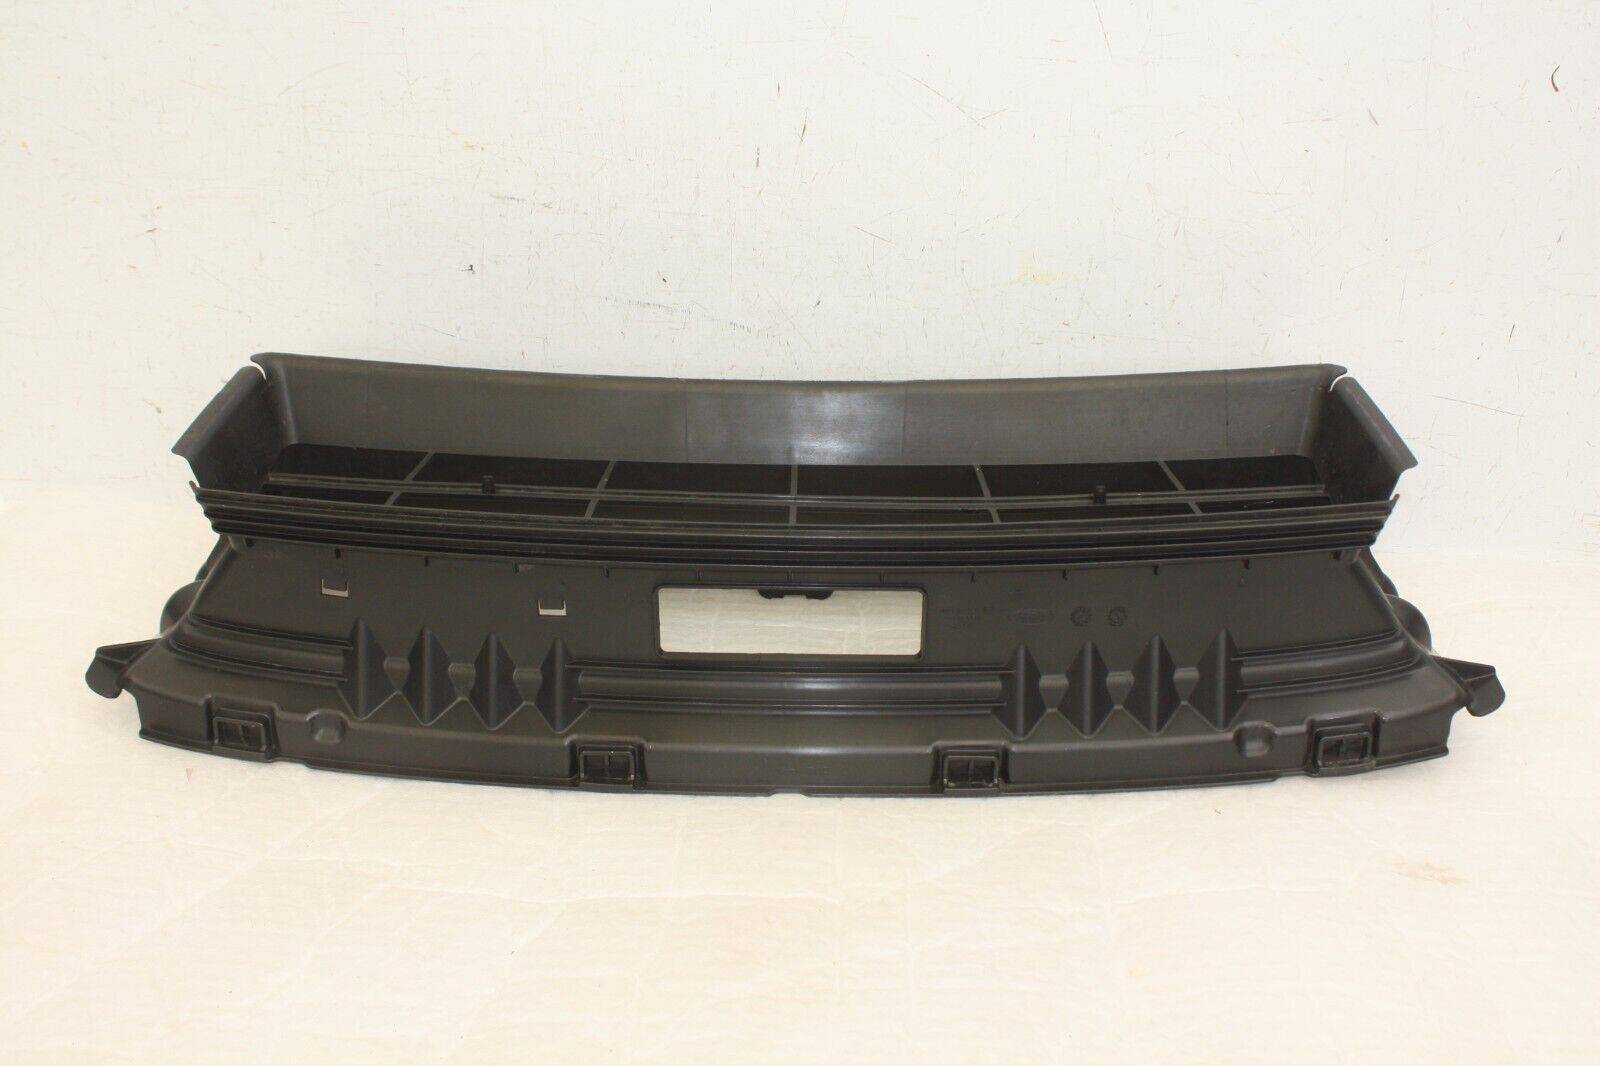 Ford-Galaxy-Mondeo-Steering-Wheel-Weather-Grill-LM2B-8312-AC-Genuine-176340050681-4